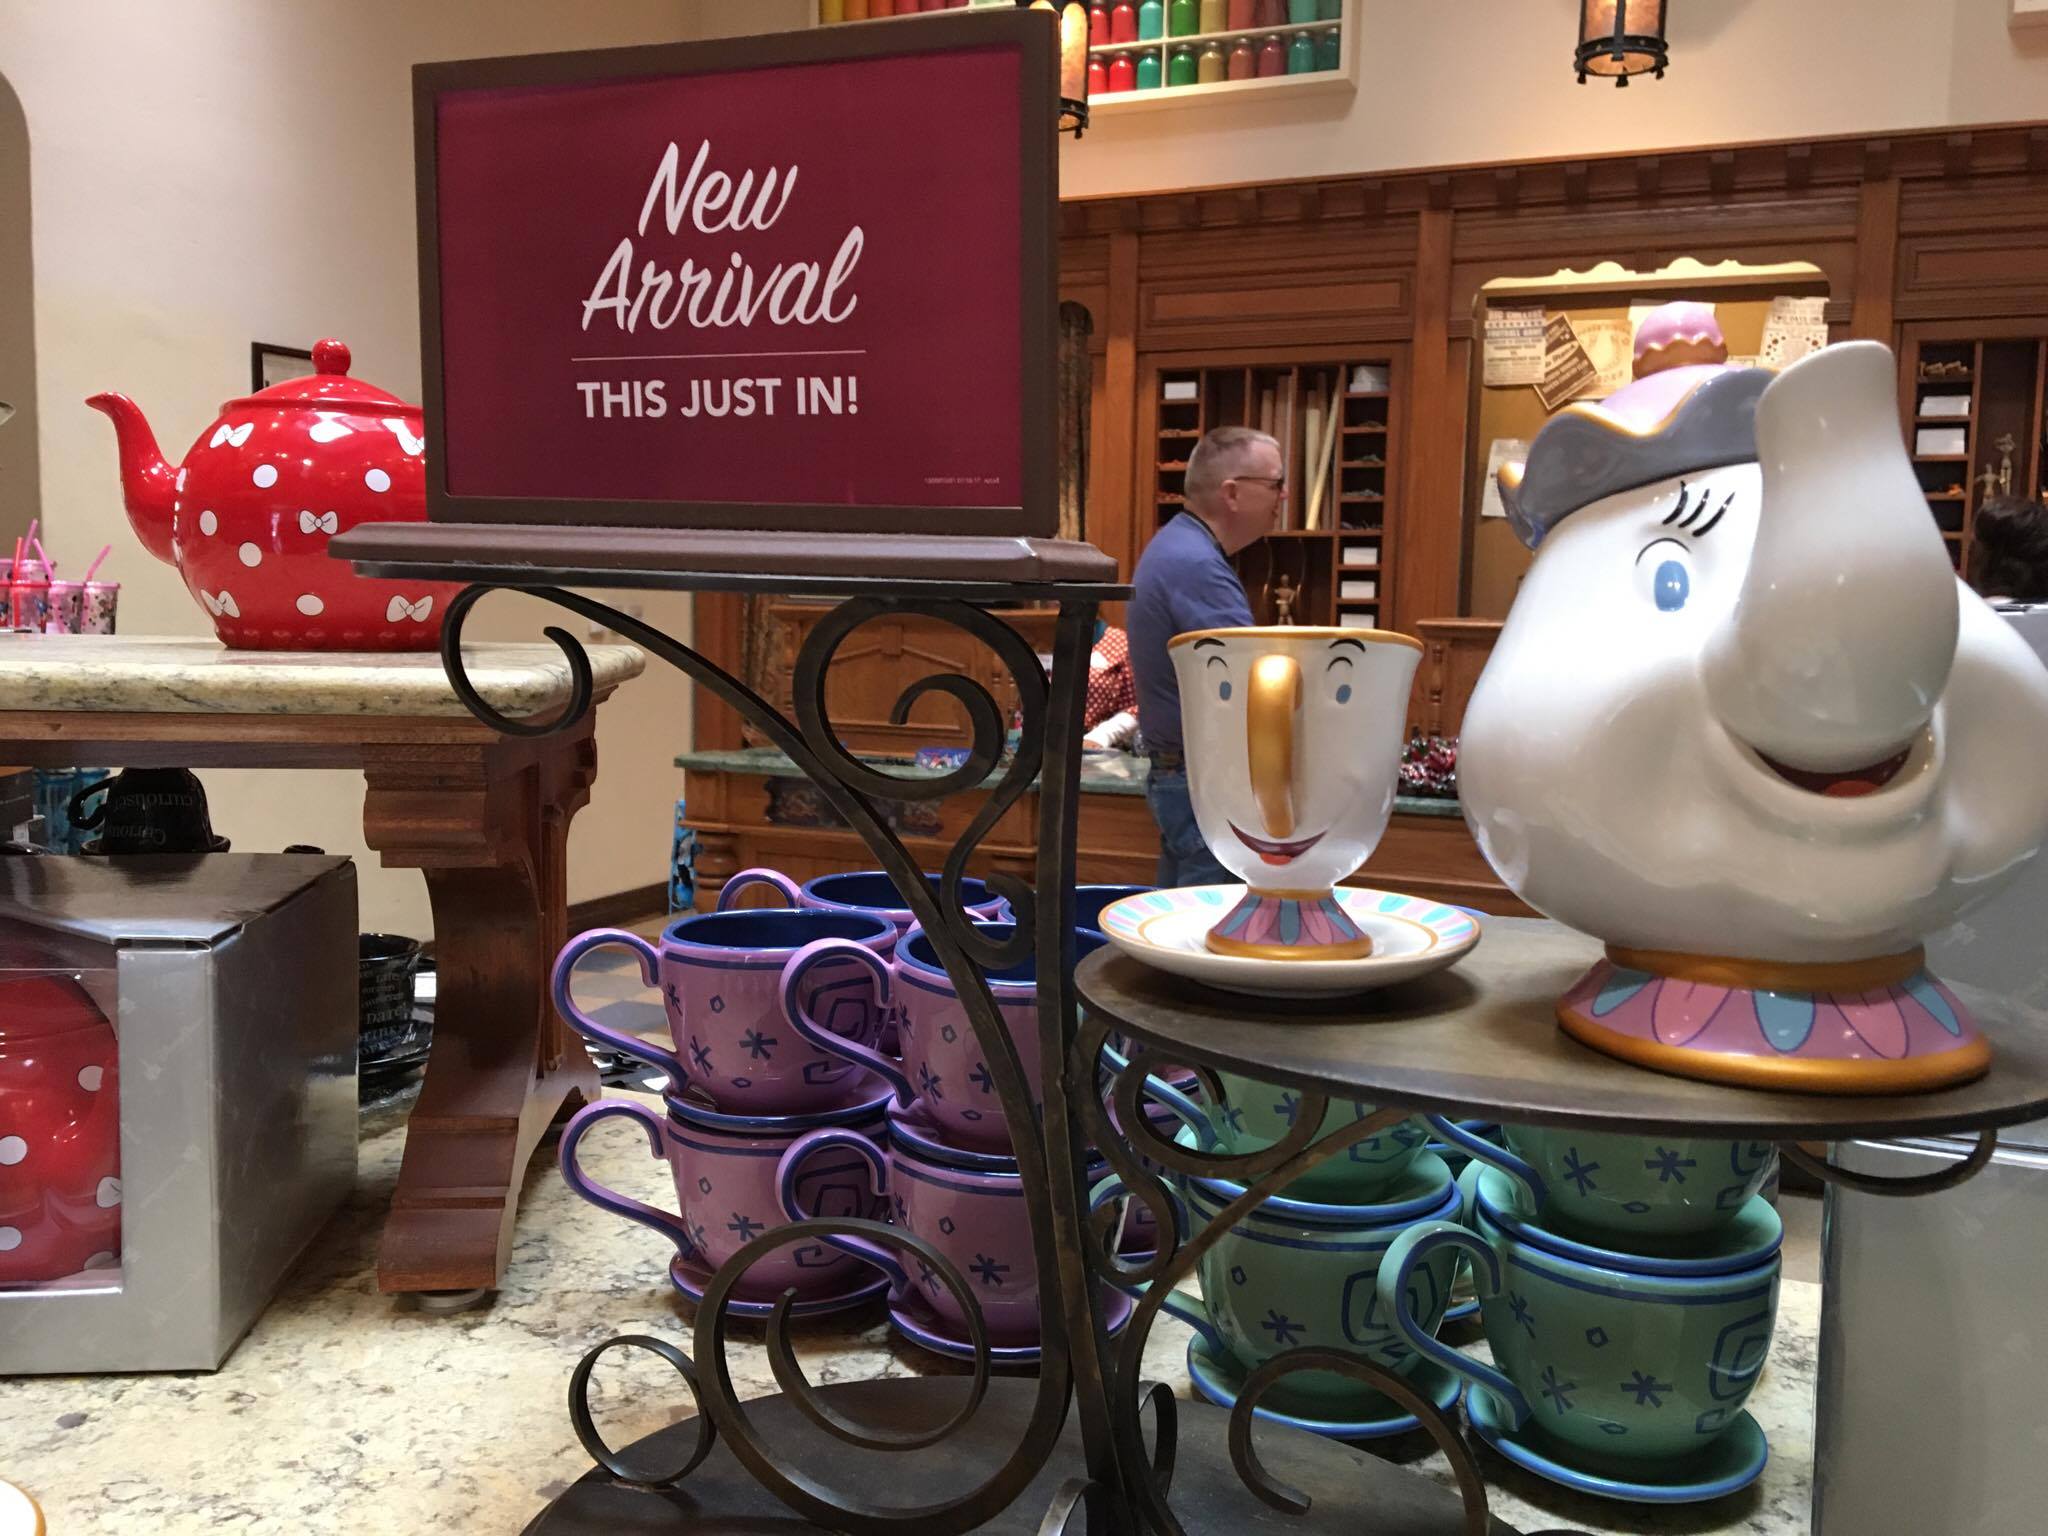 New signs advertise fresh items coming into Disney Parks.